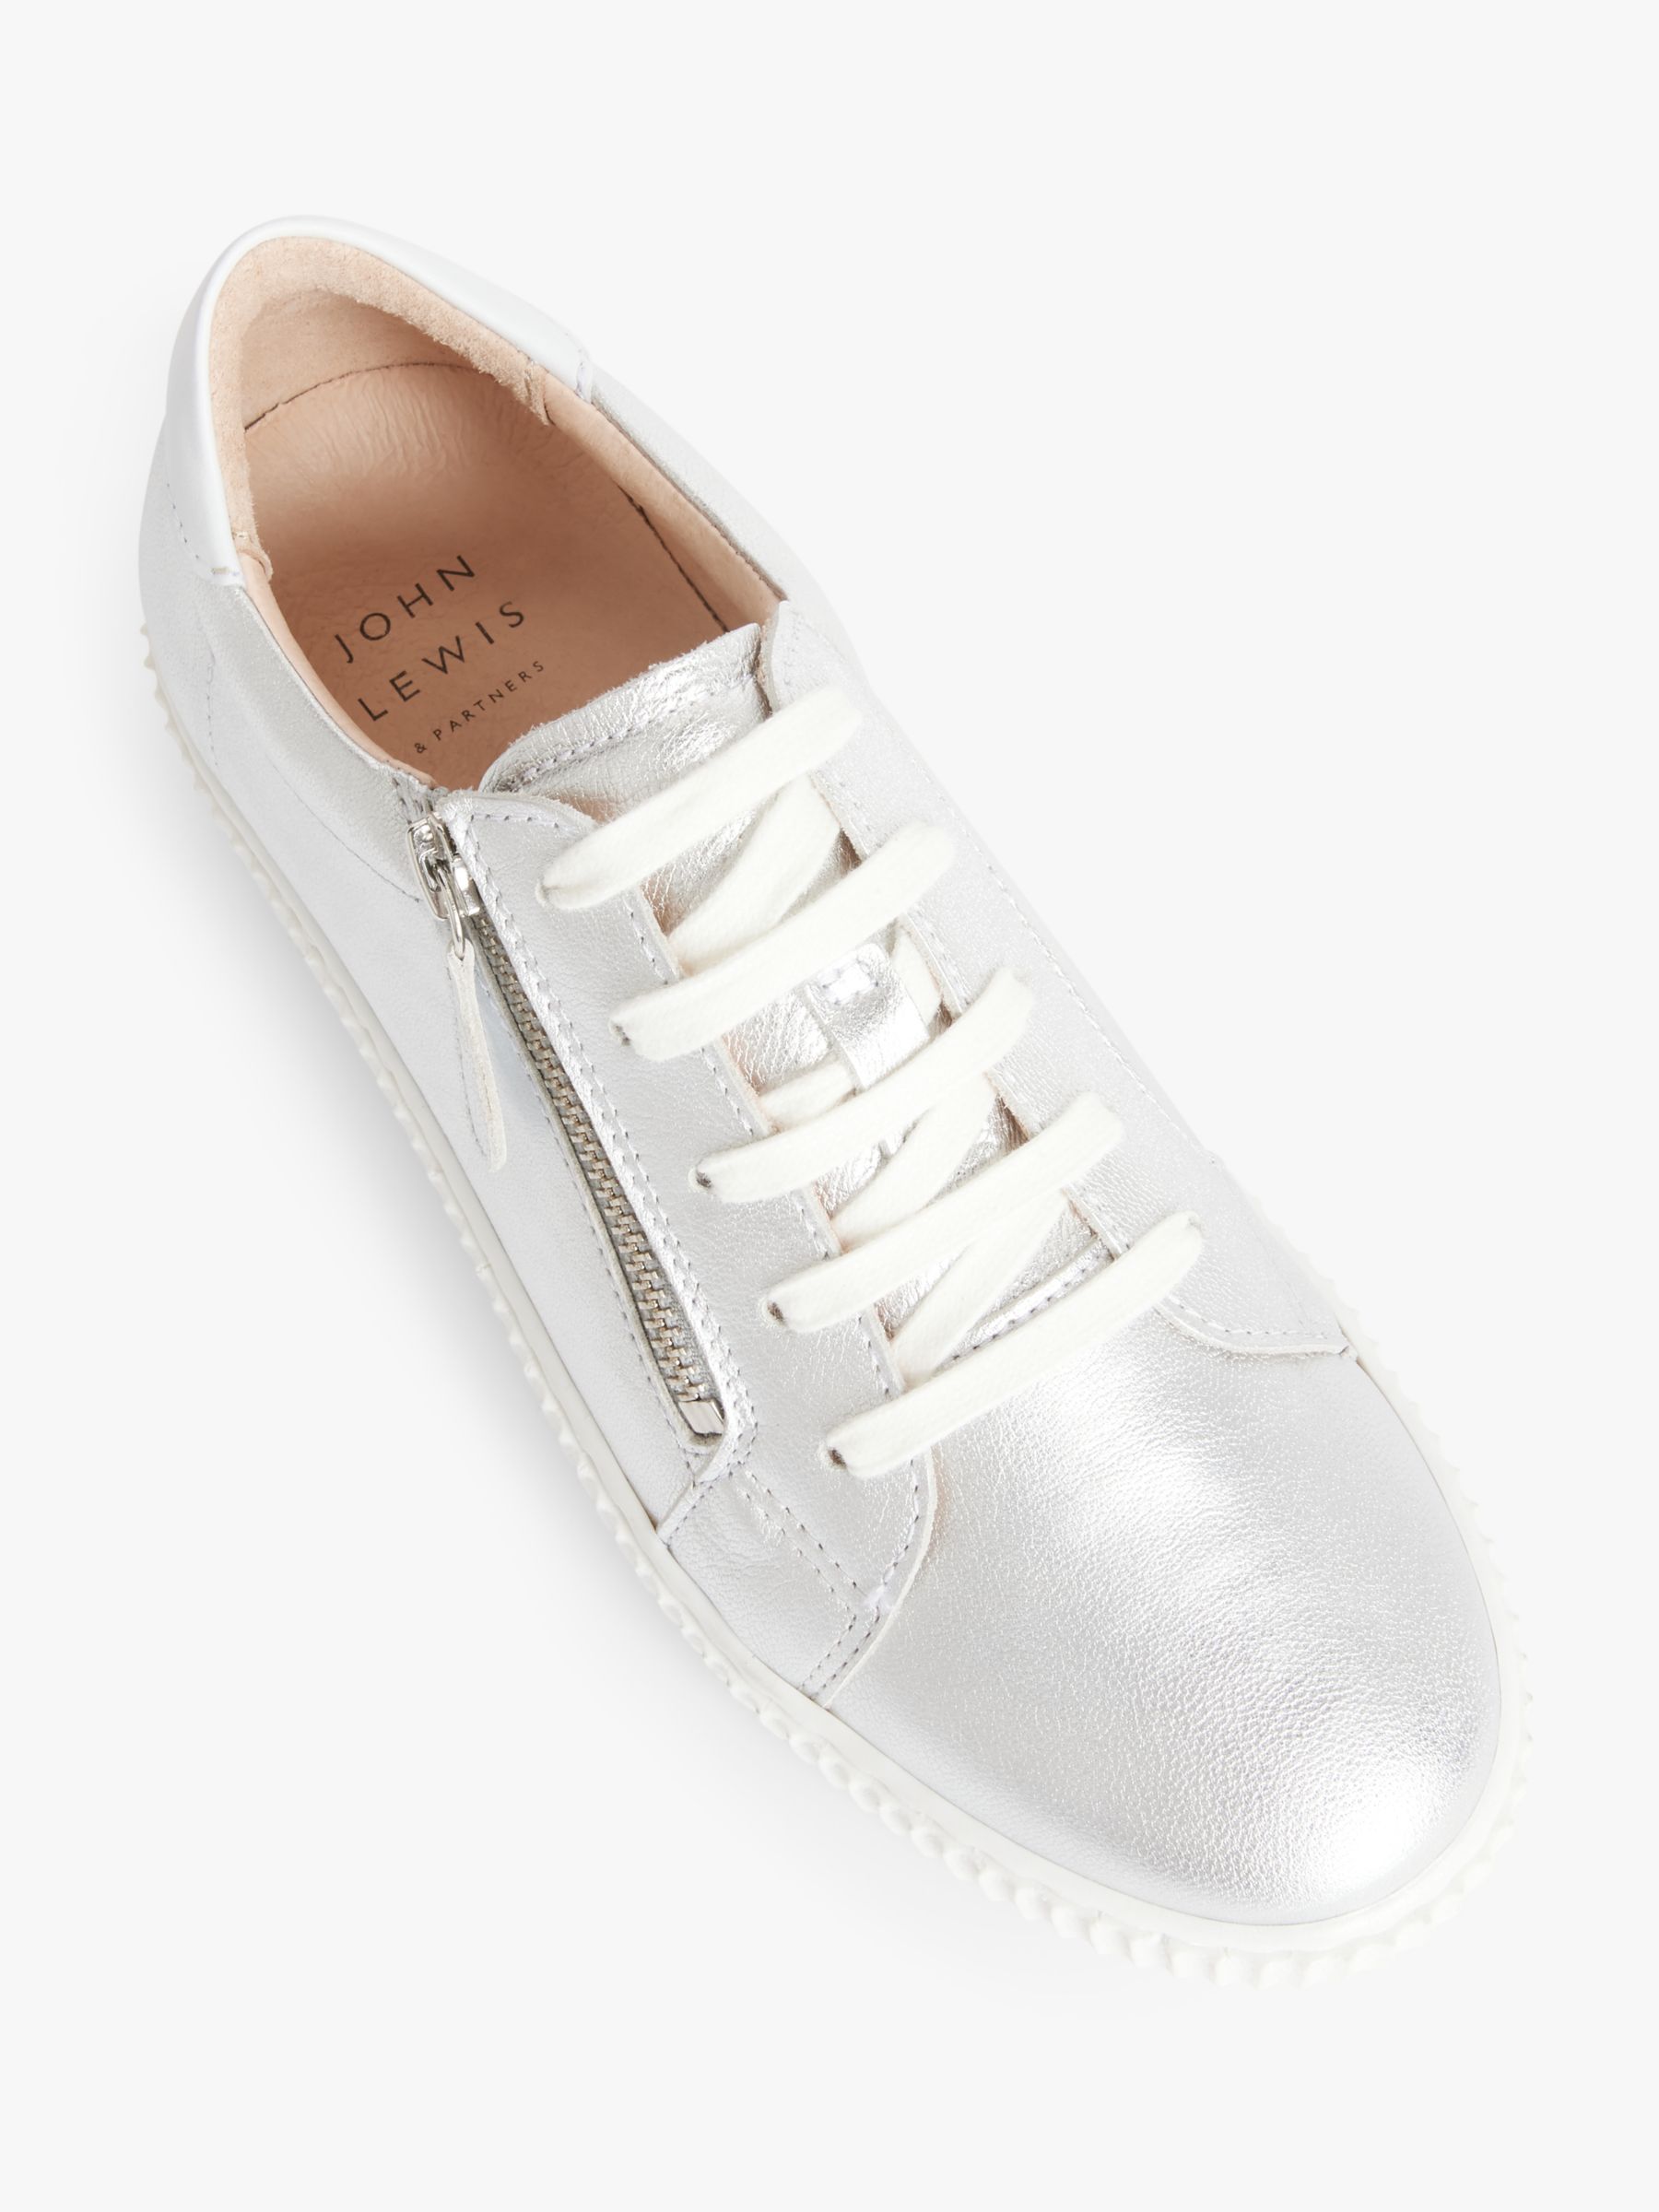 Buy John Lewis Edison Leather Trainers Online at johnlewis.com